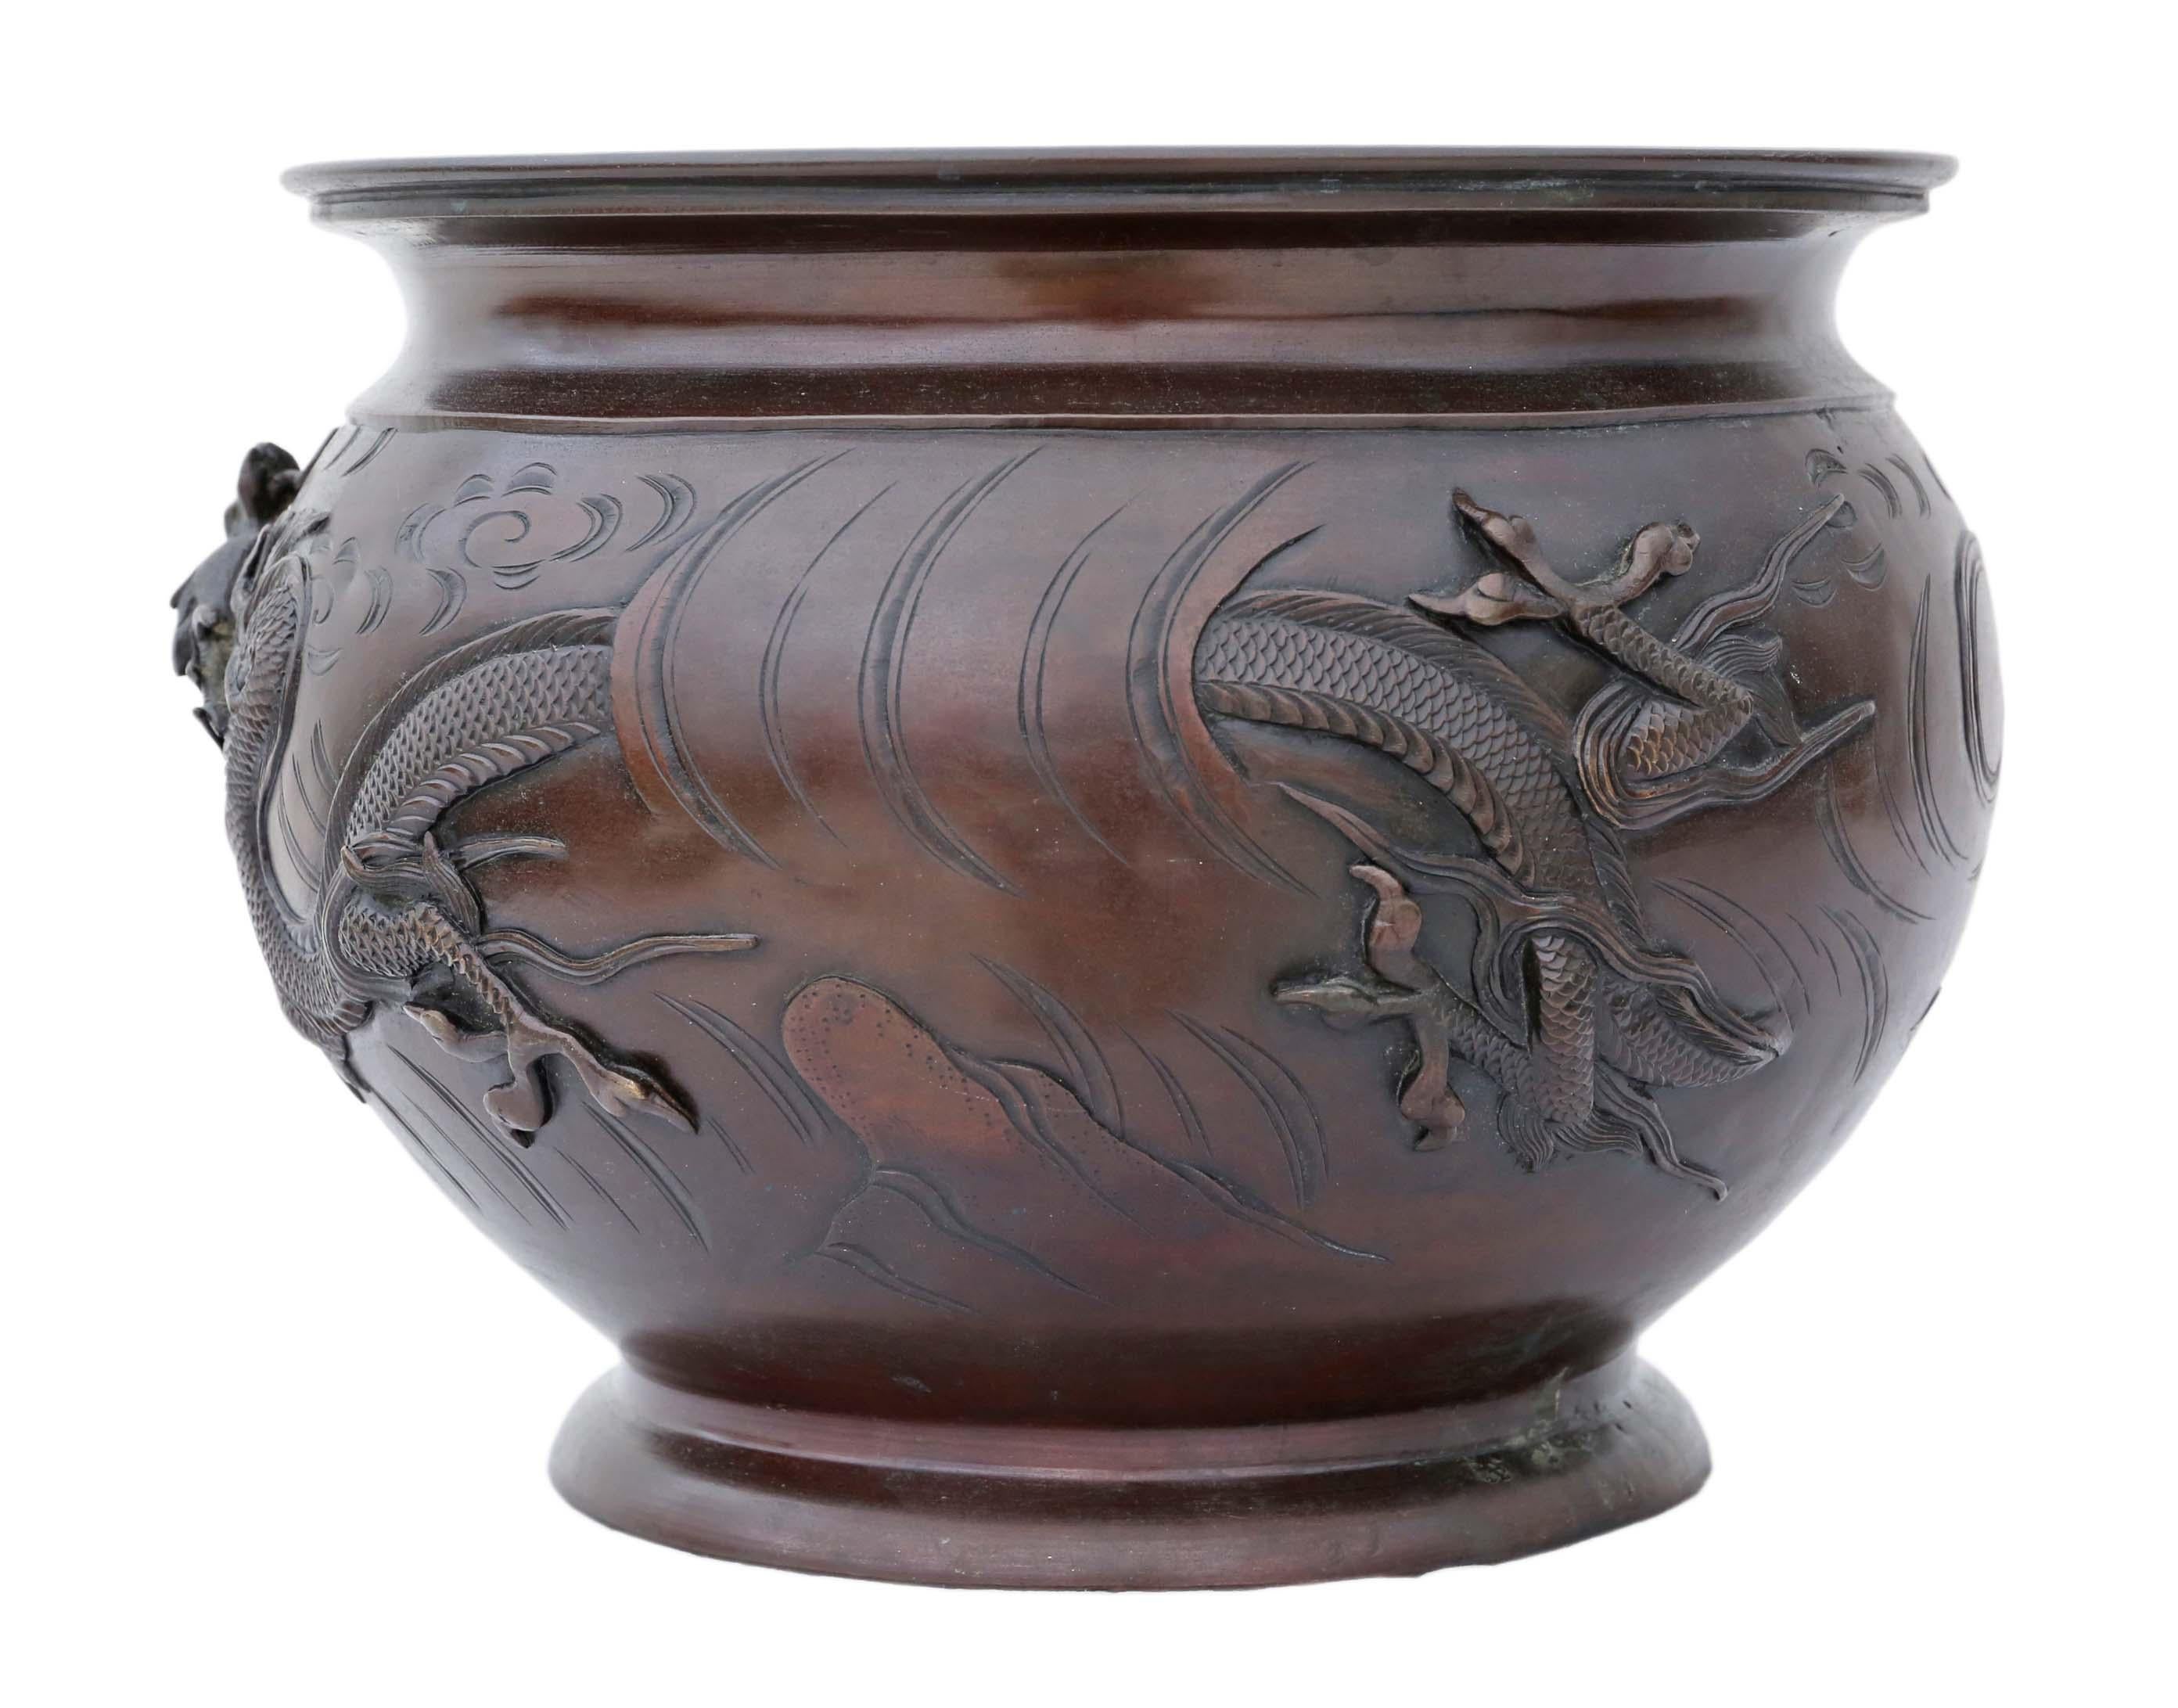 Antique very large Japanese 19th century bronze jardinière planter.
Would look amazing in the right location, large enough to make a real statement. The best colour and patina.
Overall maximum dimensions: 34 cm diameter x 25 cm high.
In good